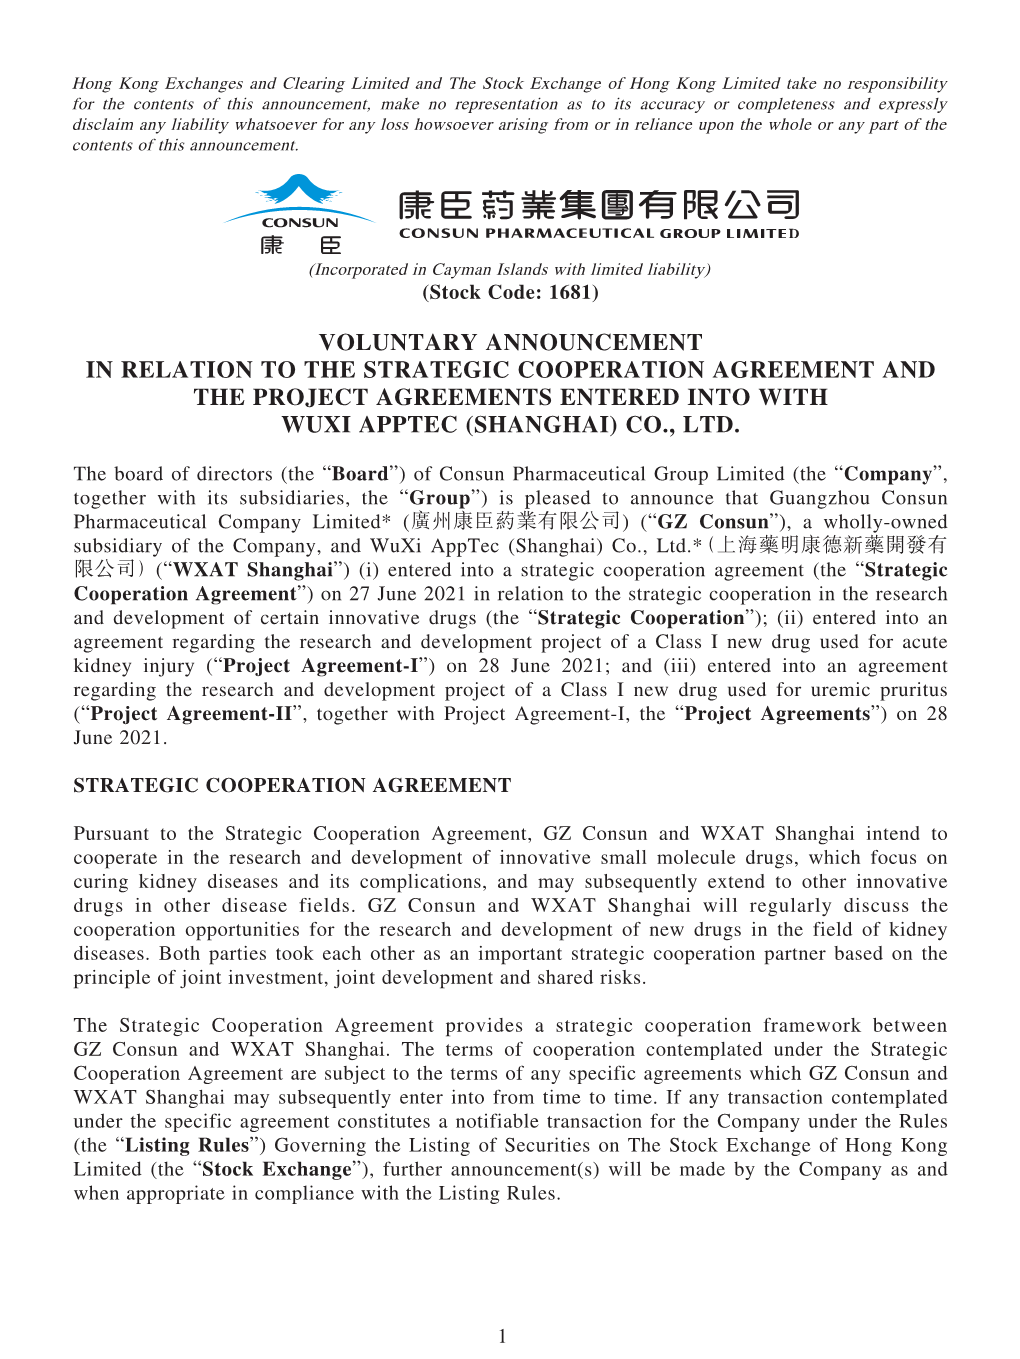 Voluntary Announcement in Relation to the Strategic Cooperation Agreement and the Project Agreements Entered Into with Wuxi Apptec (Shanghai) Co., Ltd